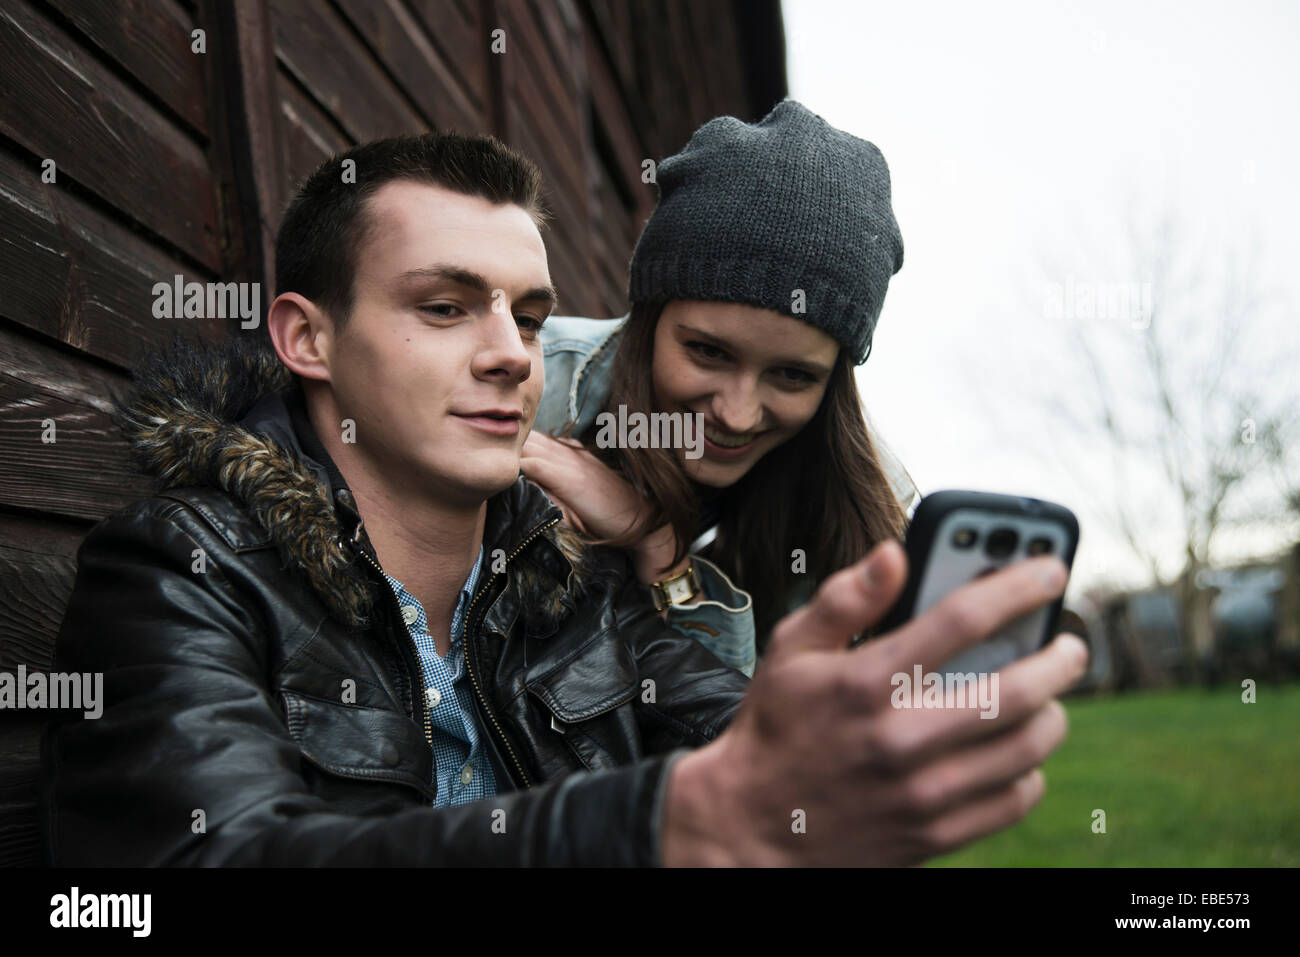 Close-up of young man and teenage girl outdoors, looking at cell phone, Germany Stock Photo